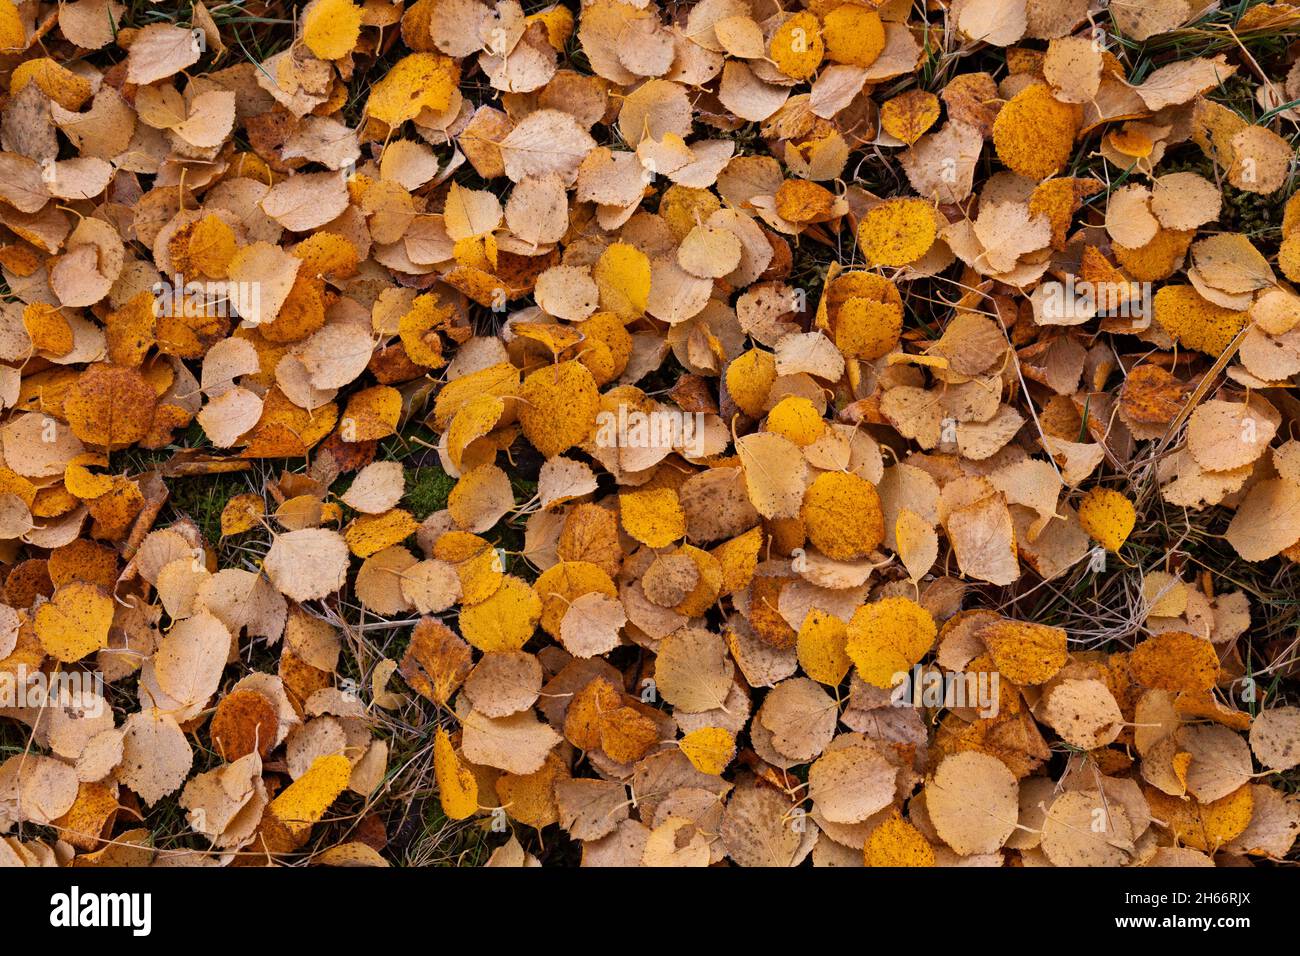 A carpet of fallen colorful Silver birch, Betula pendula leaves covering the ground during autumn foliage. Stock Photo